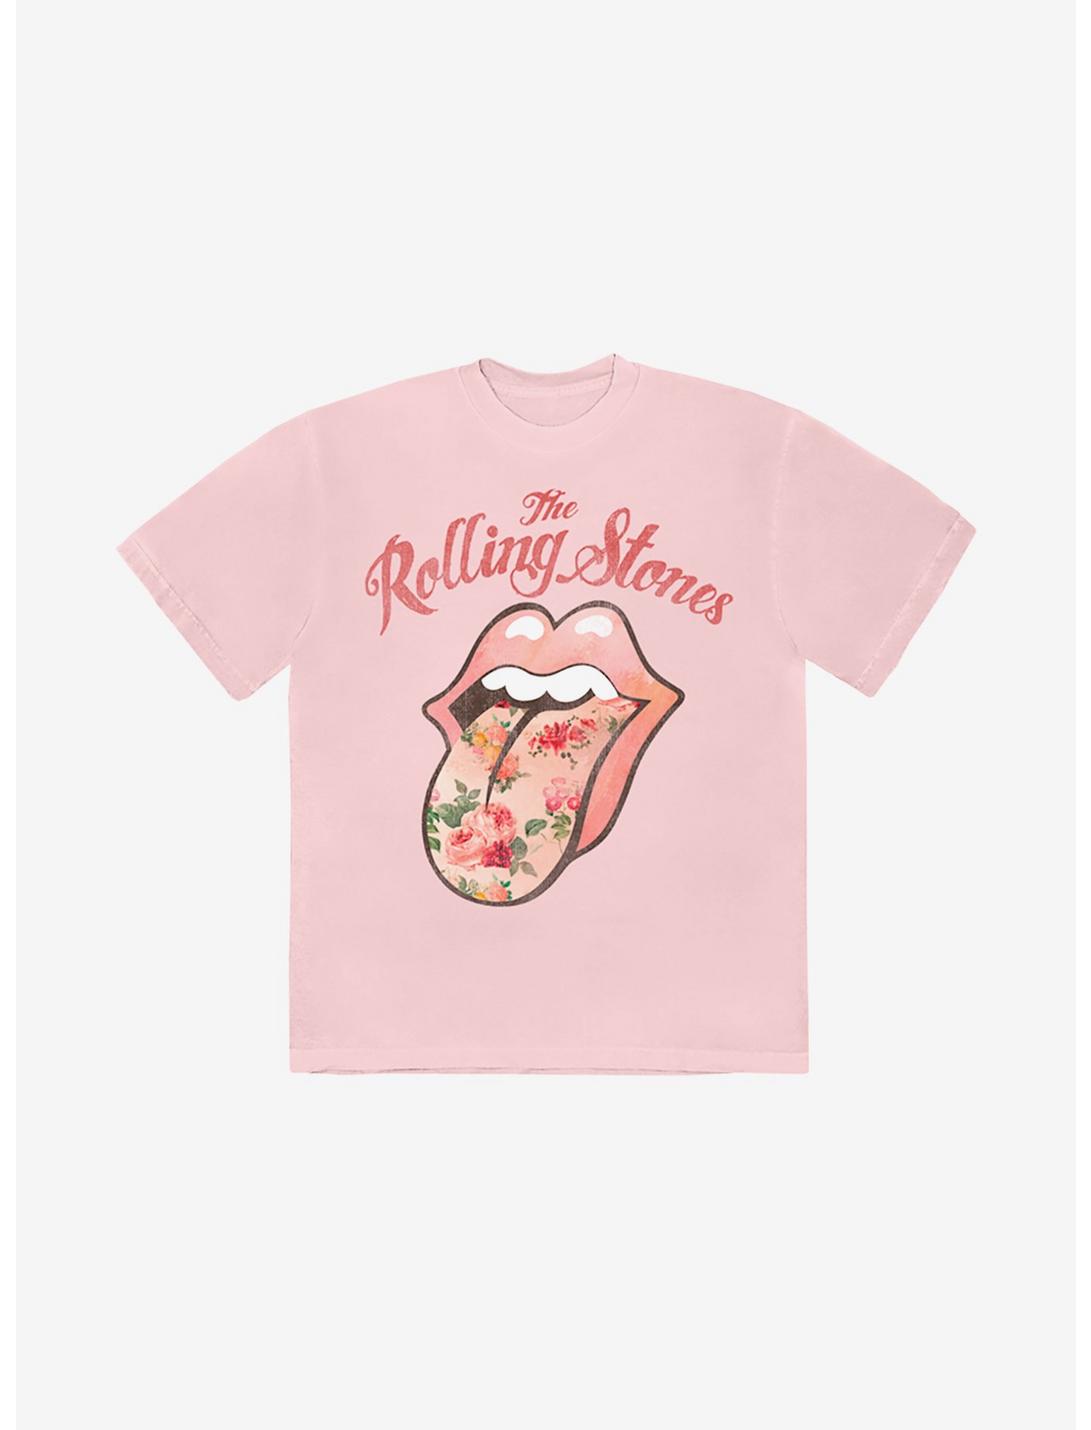 The Rolling Stones Floral Logo Boyfriend Fit Girls T-Shirt | Hot Topic